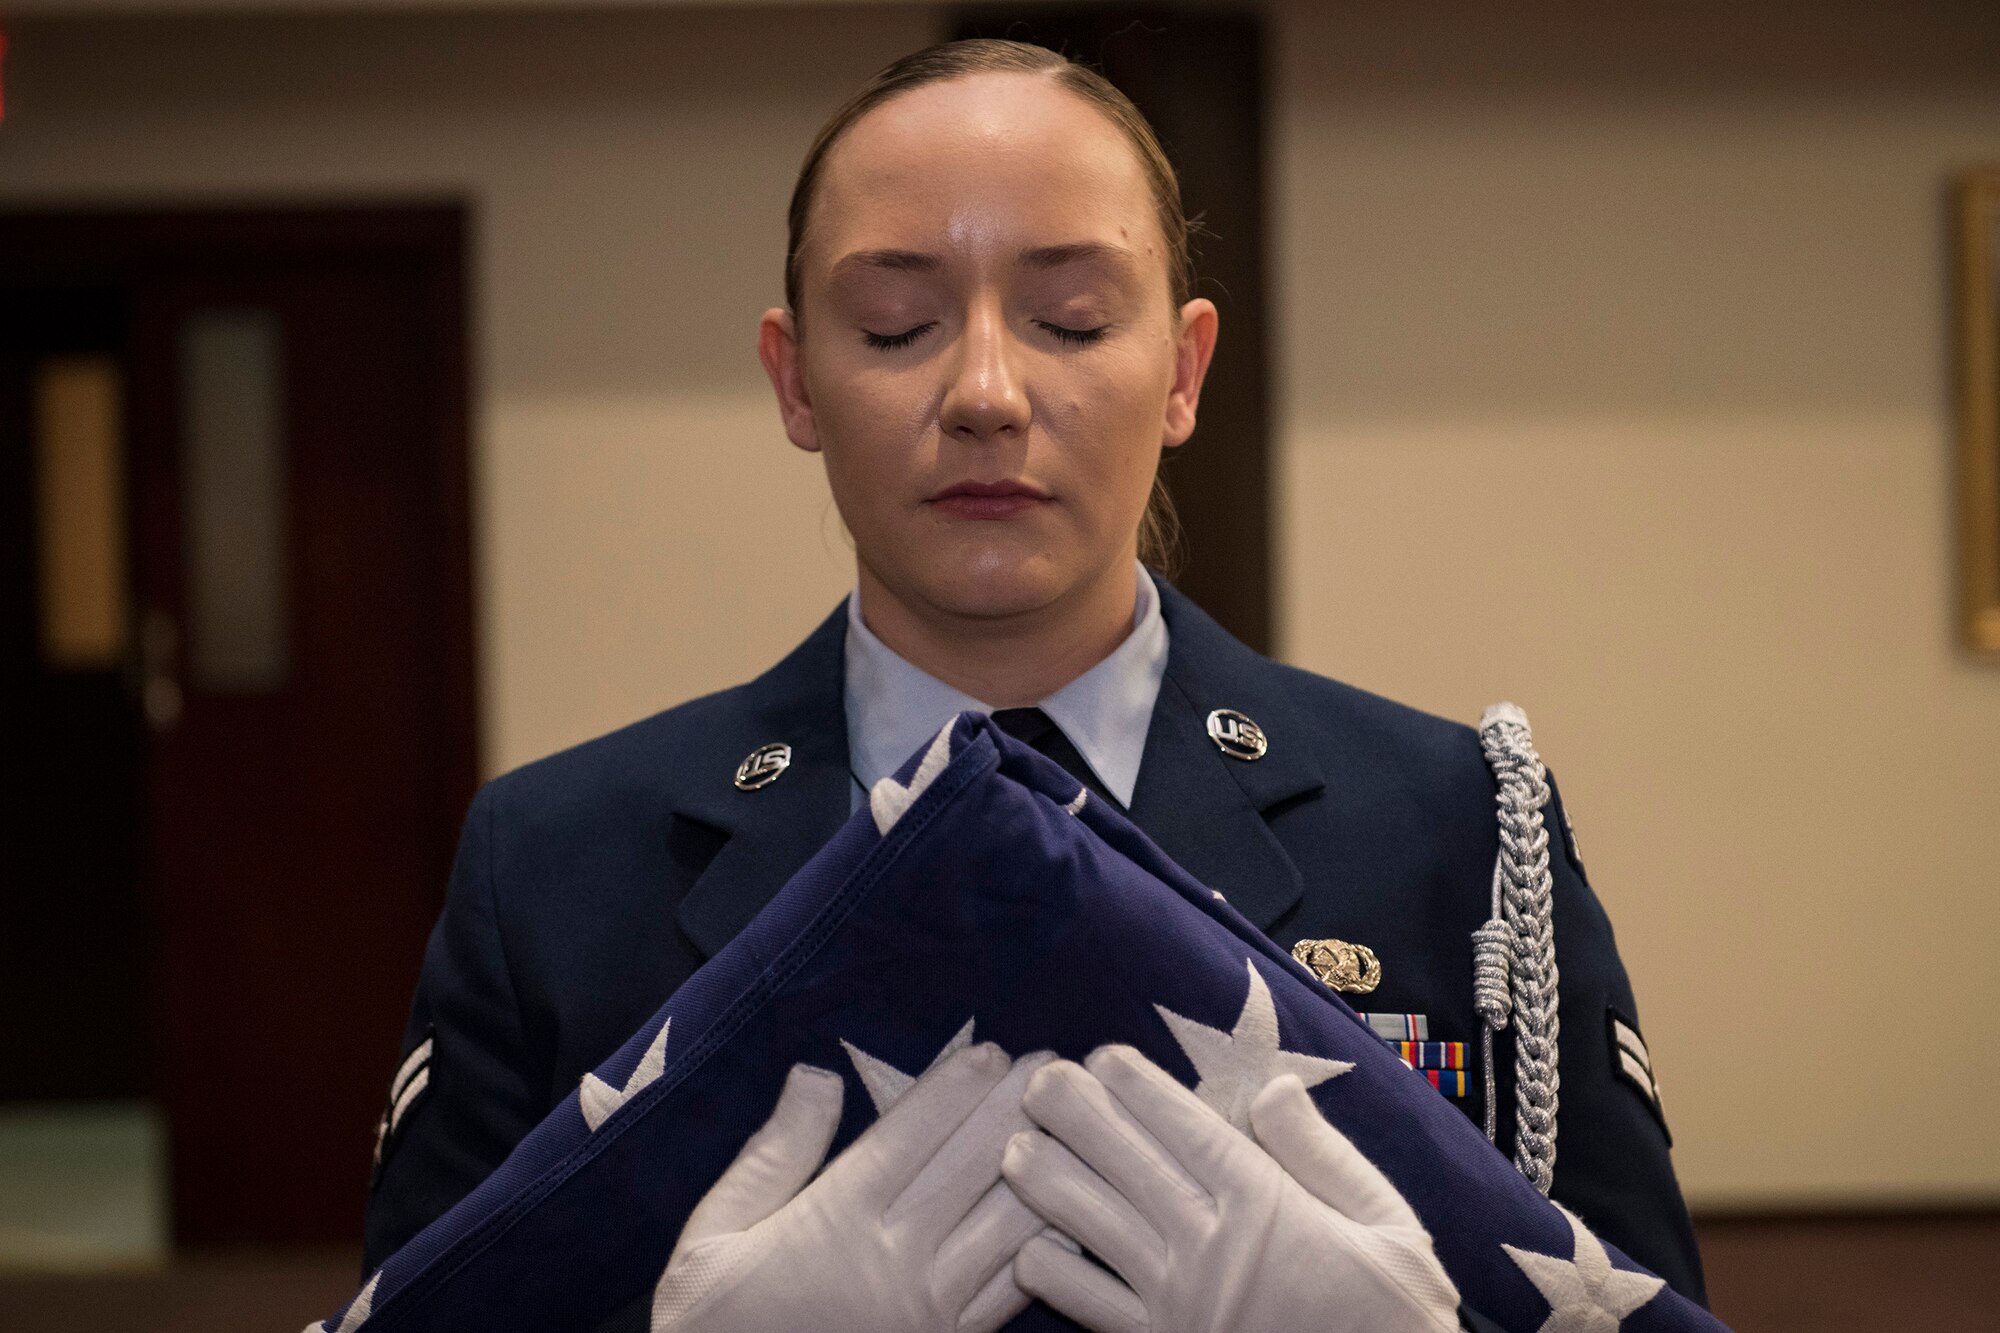 U.S. Air Force Airman 1st Class Molly Collyer, 39th Air Base Wing honor guardsmen holds a folded flag during a 9/11 remembrance ceremony Sept. 11, 2019, at Incirlik Air Base, Turkey. The flag folding honored the brave men and women who lost their lives as a consequence of the 9/11 terrorist attacks and resulting conflicts. (U.S. Air Force photo by Staff Sgt. Ceaira Tinsley)